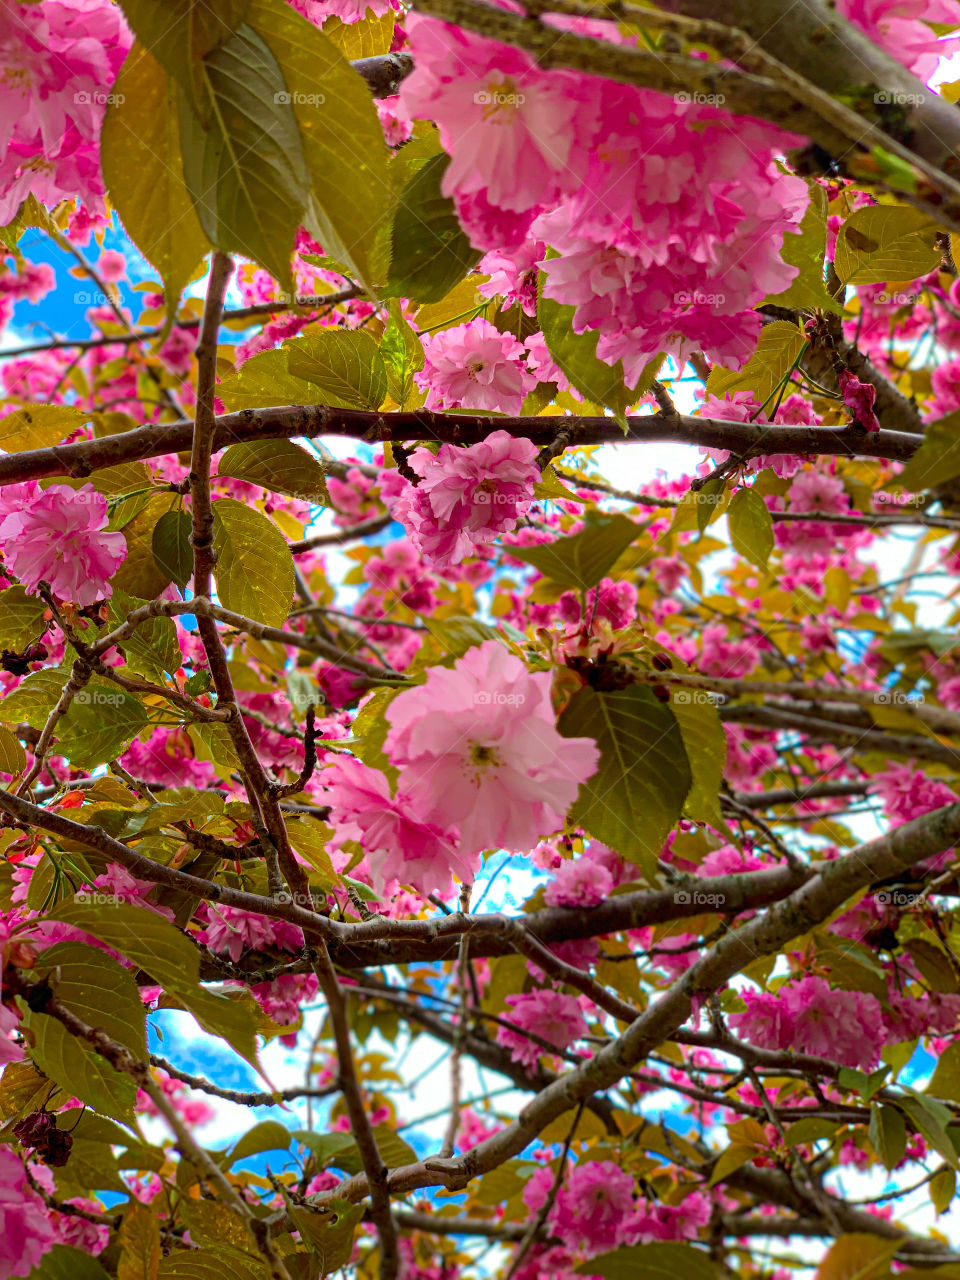 looking up at the the sky through branches of a tree with green leaves and pretty pink blossoms on a sunny Spring day